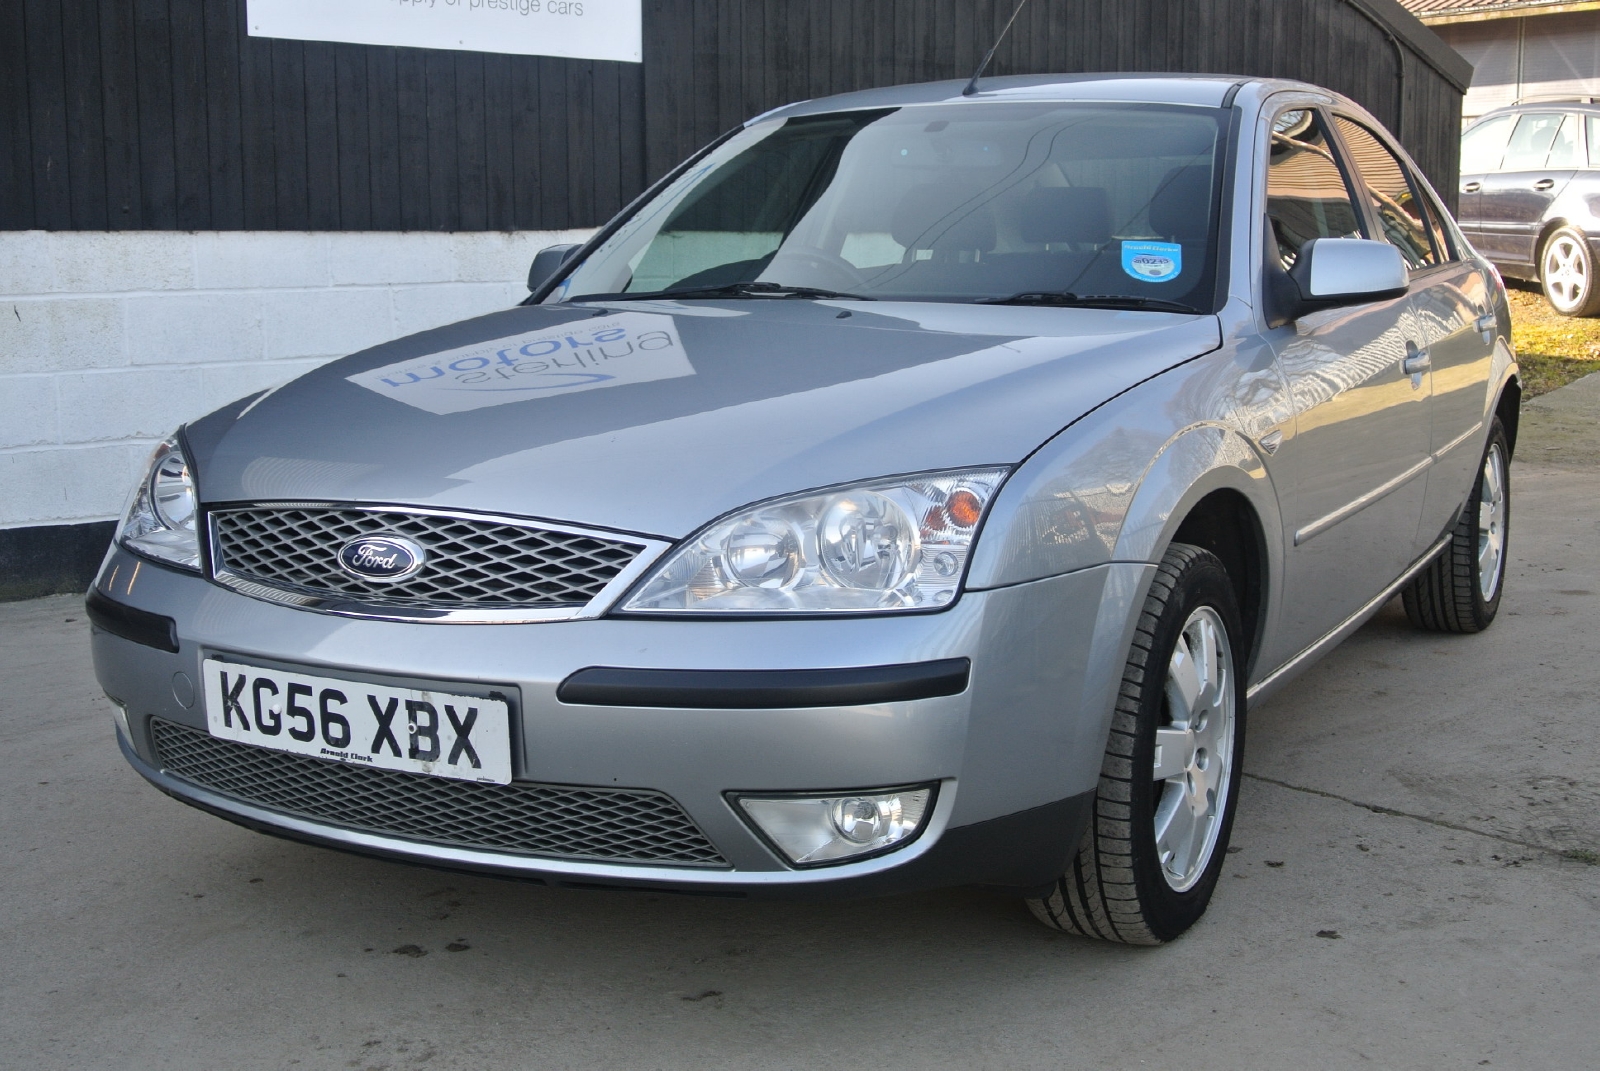 Ford Mondeo 2.0 TDCi technical details, history, photos on